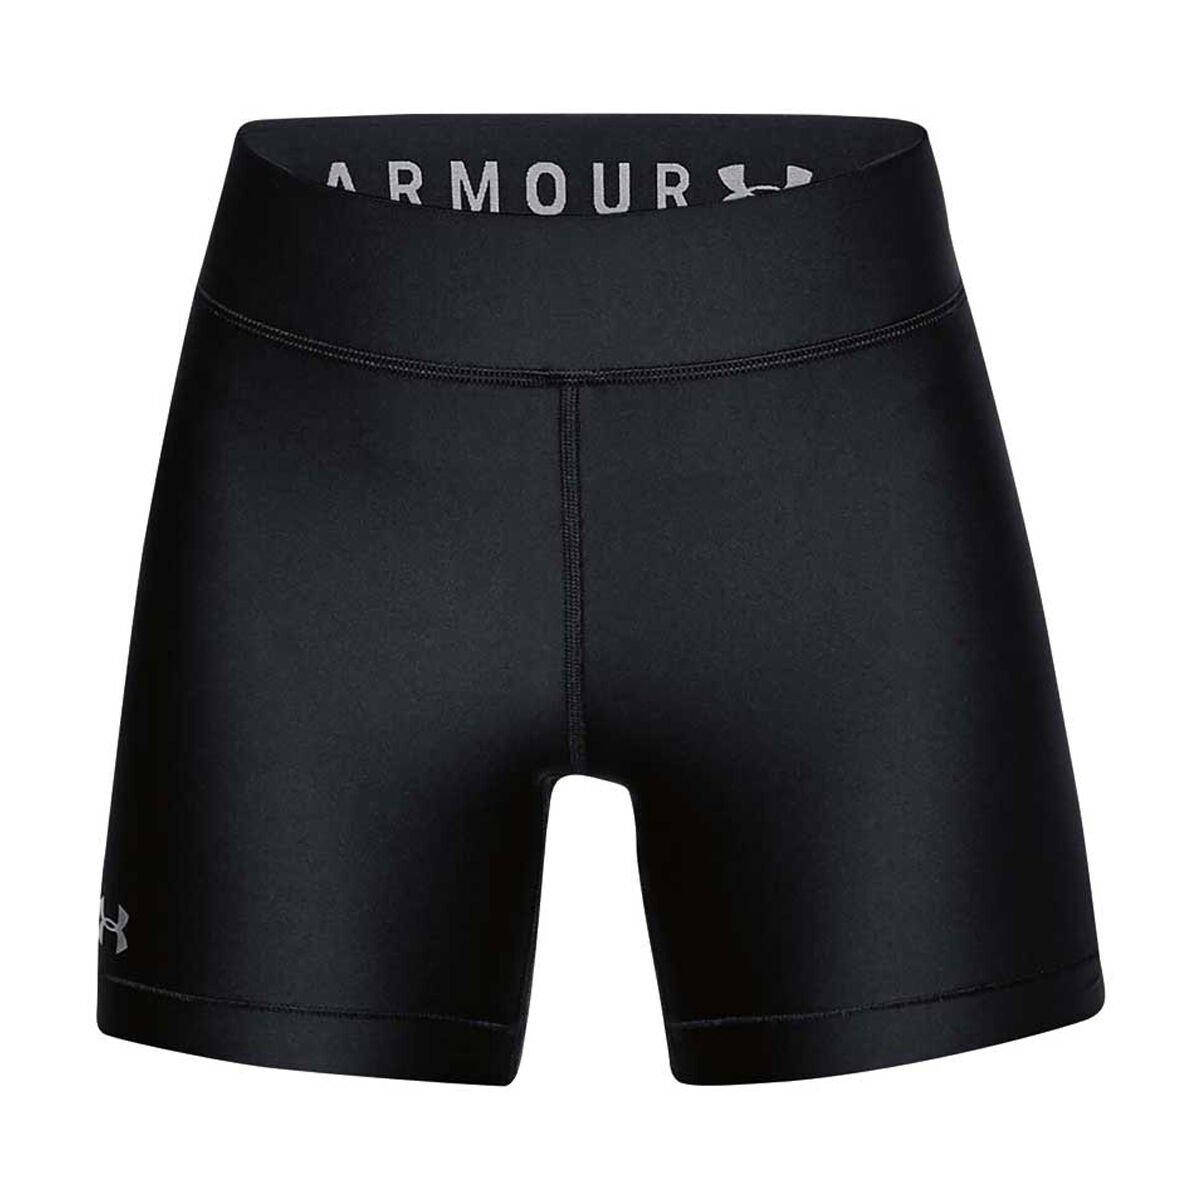 under armour 5 inch compression shorts